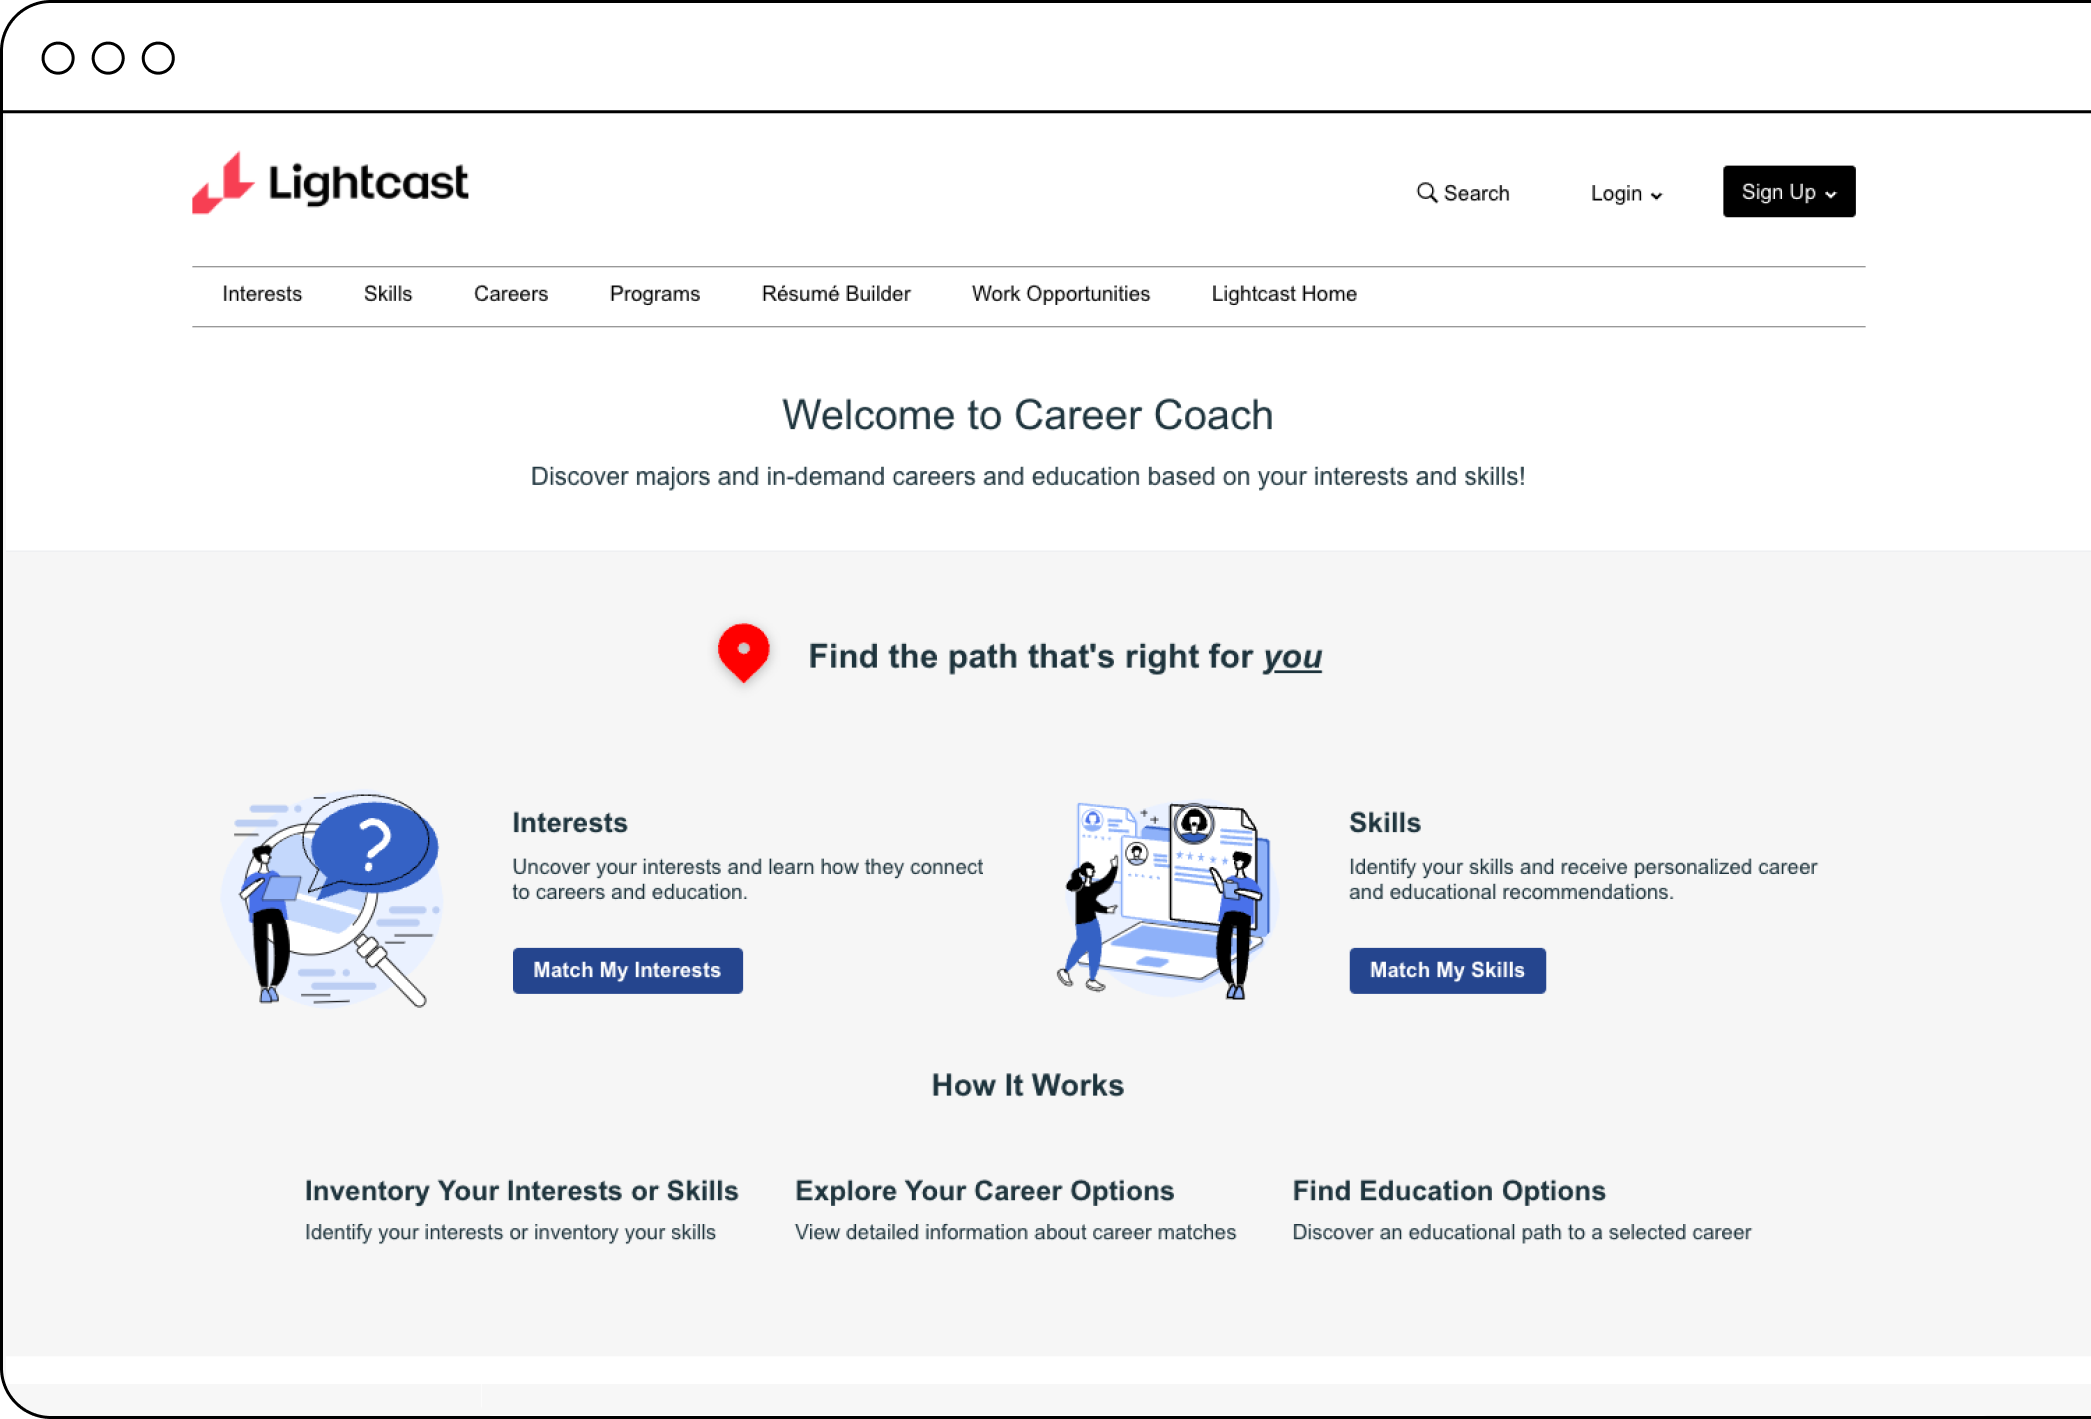 The Career Coach welcome page